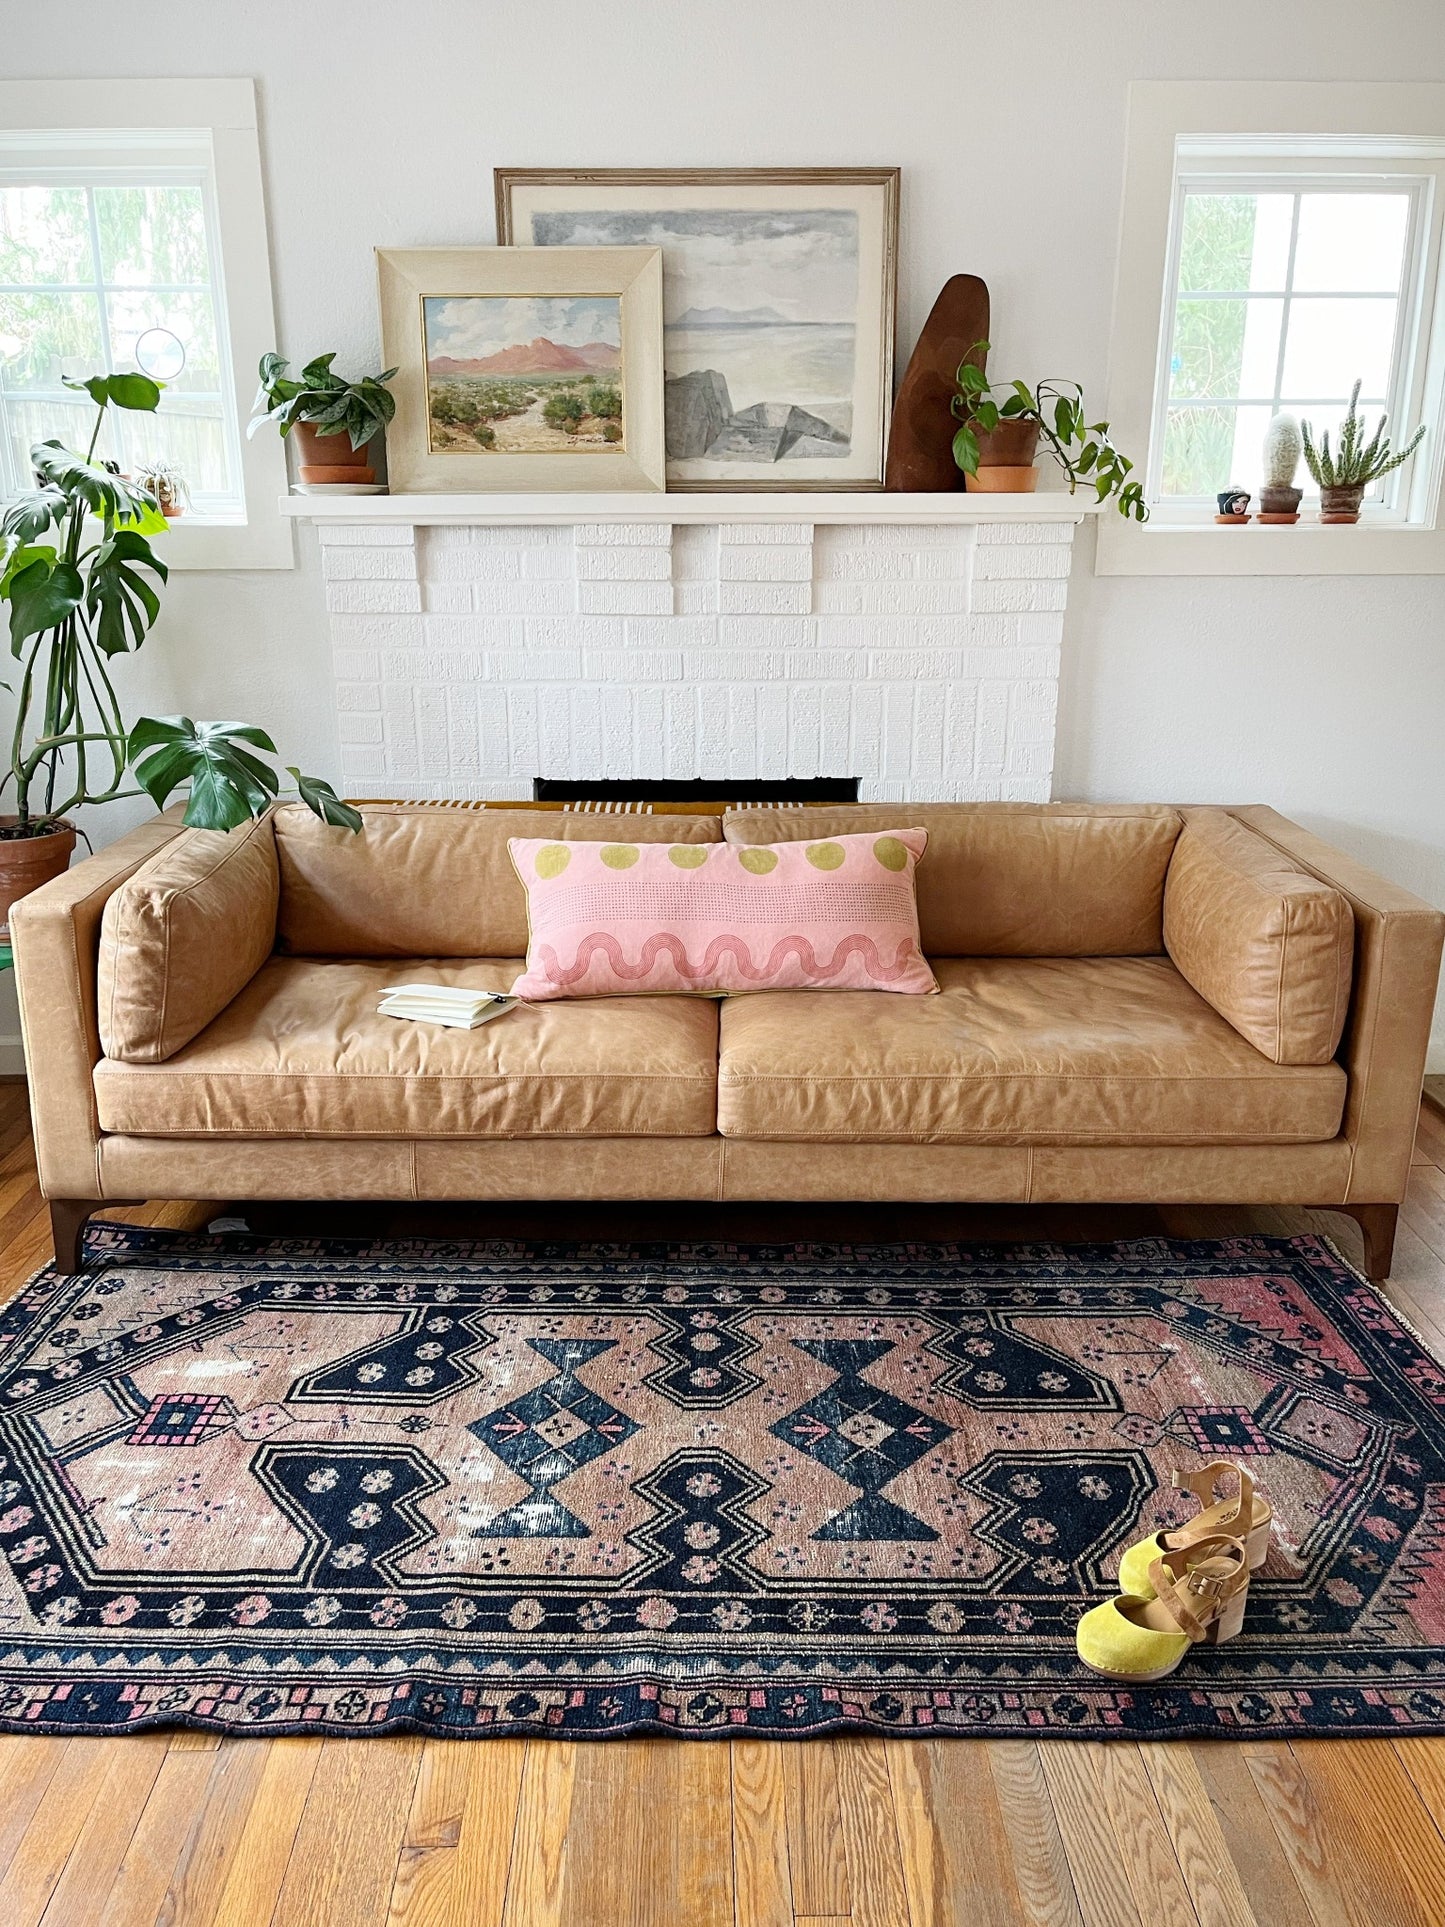 Style Vintage Arbor Persian Rug by a Modern Leather Couch